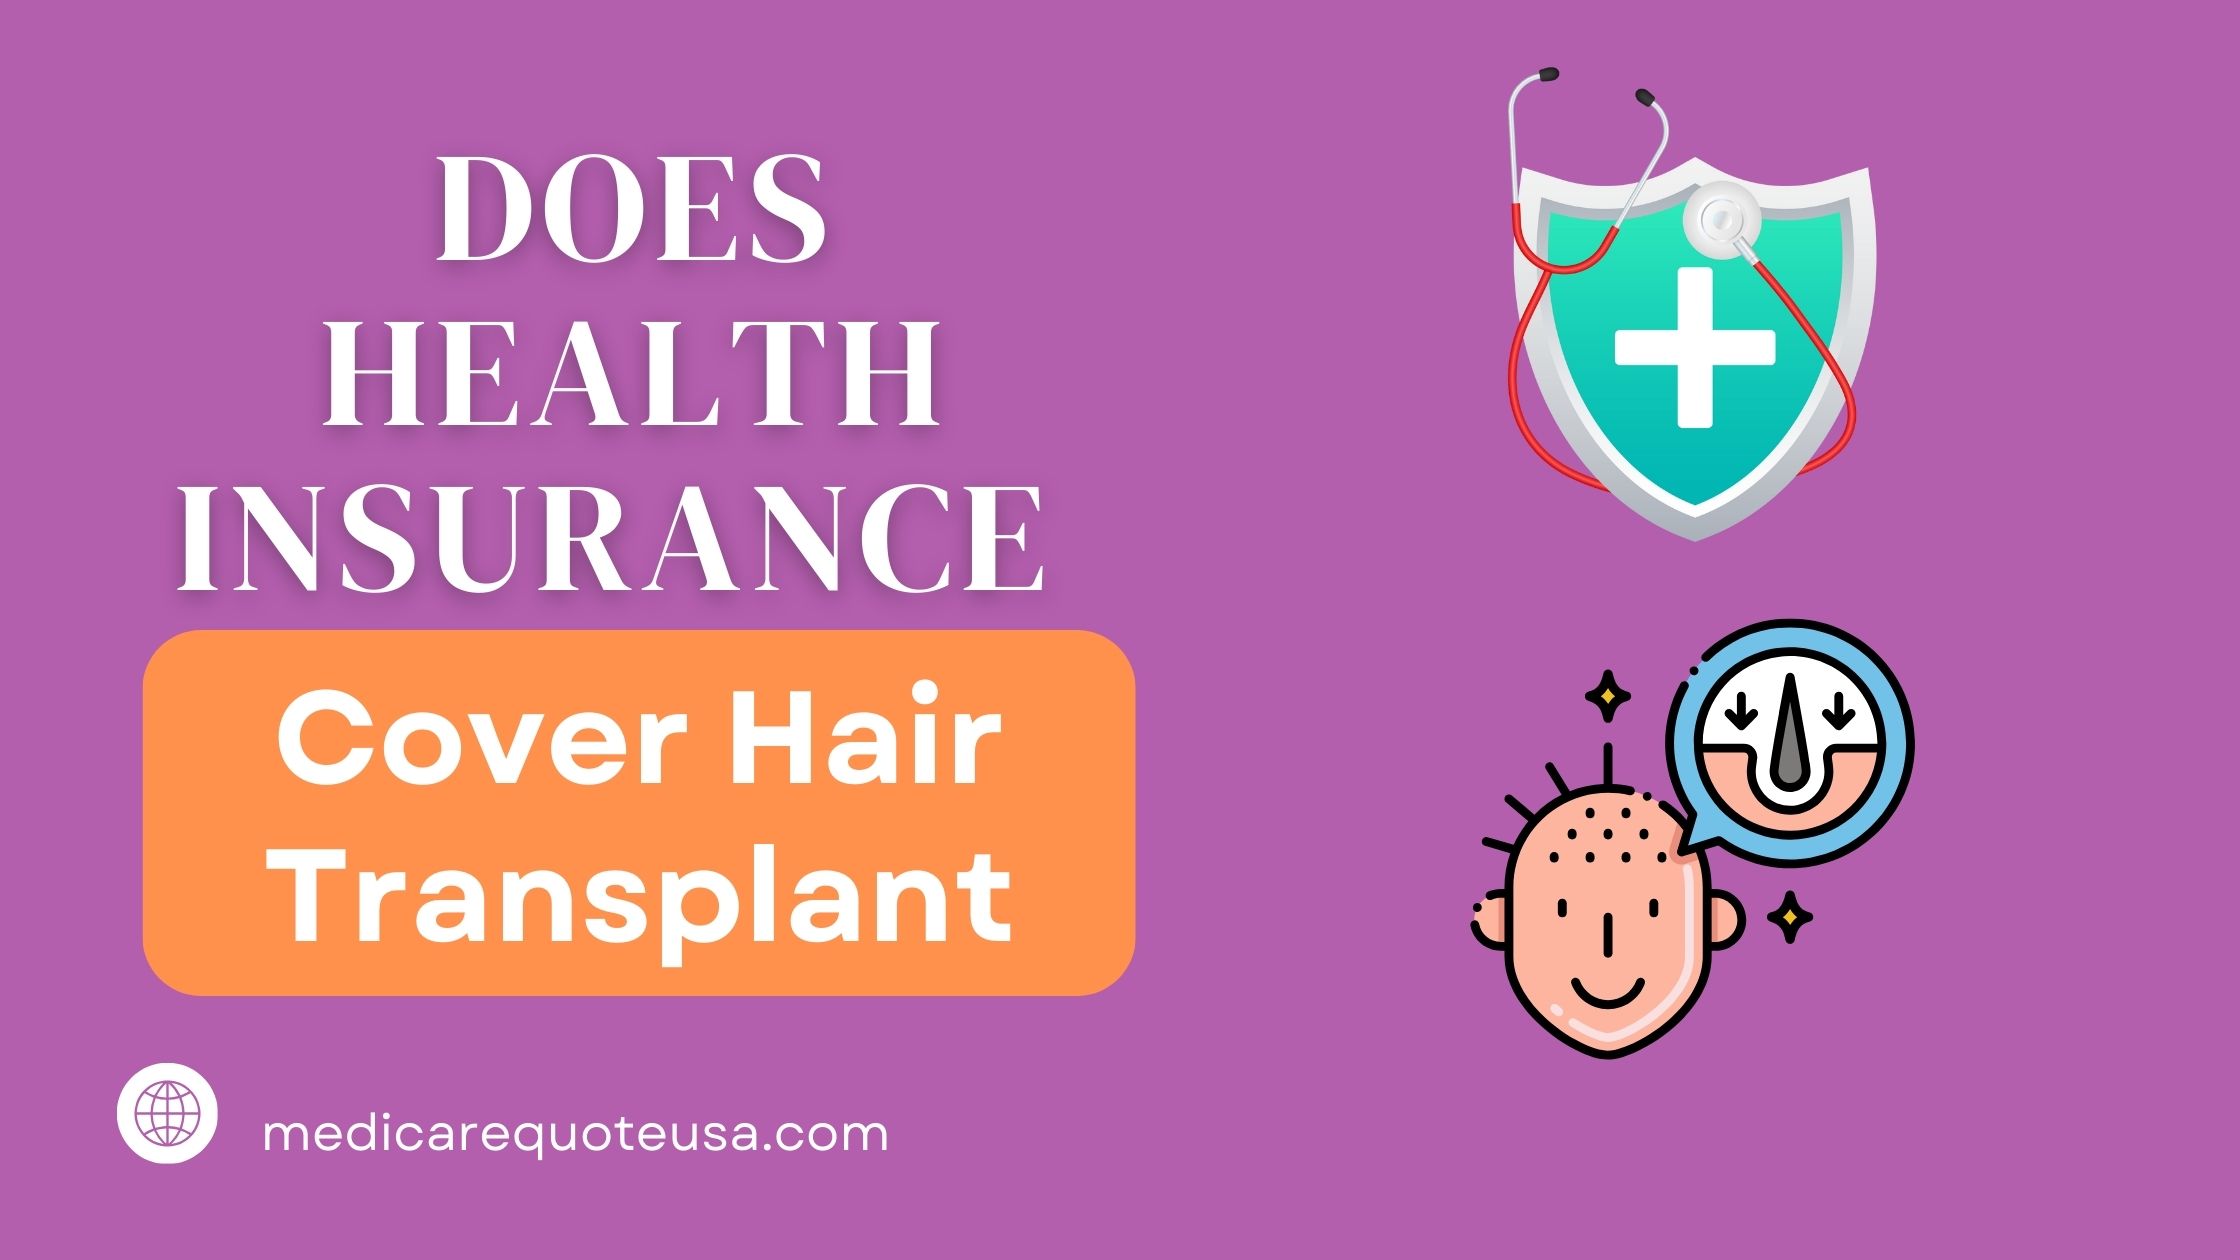 Does Health Insurance Cover Hair Transplant in USA